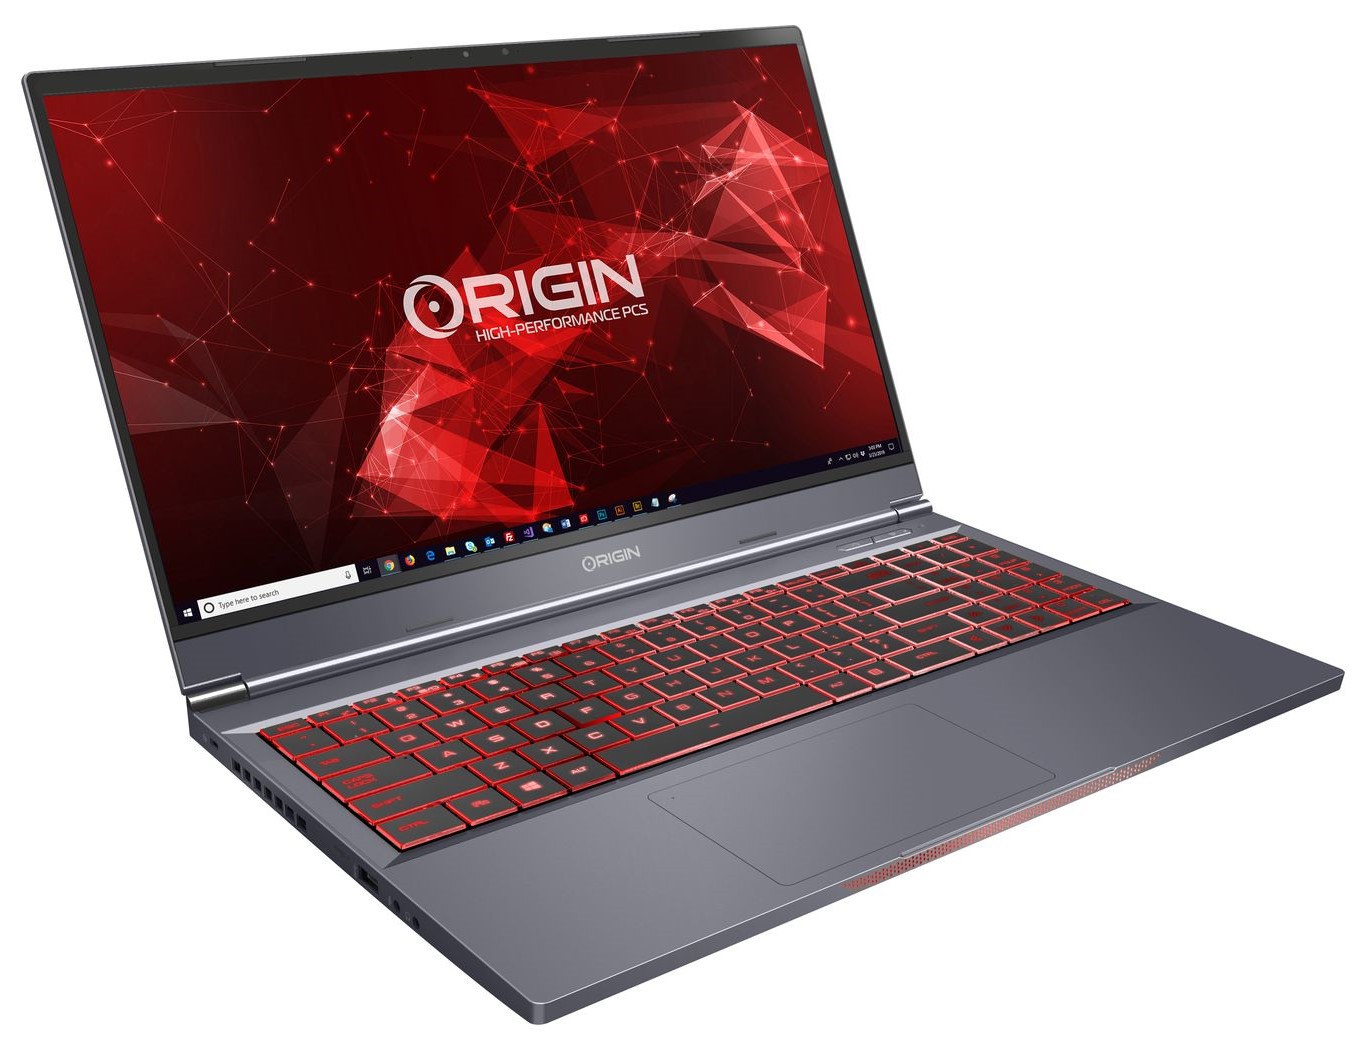 Origin PC thin and light laptop lineup Intel Alder Lake processors and up to an Nvidia RTX 3080 Ti dGPU, introduces new 14-inch - News